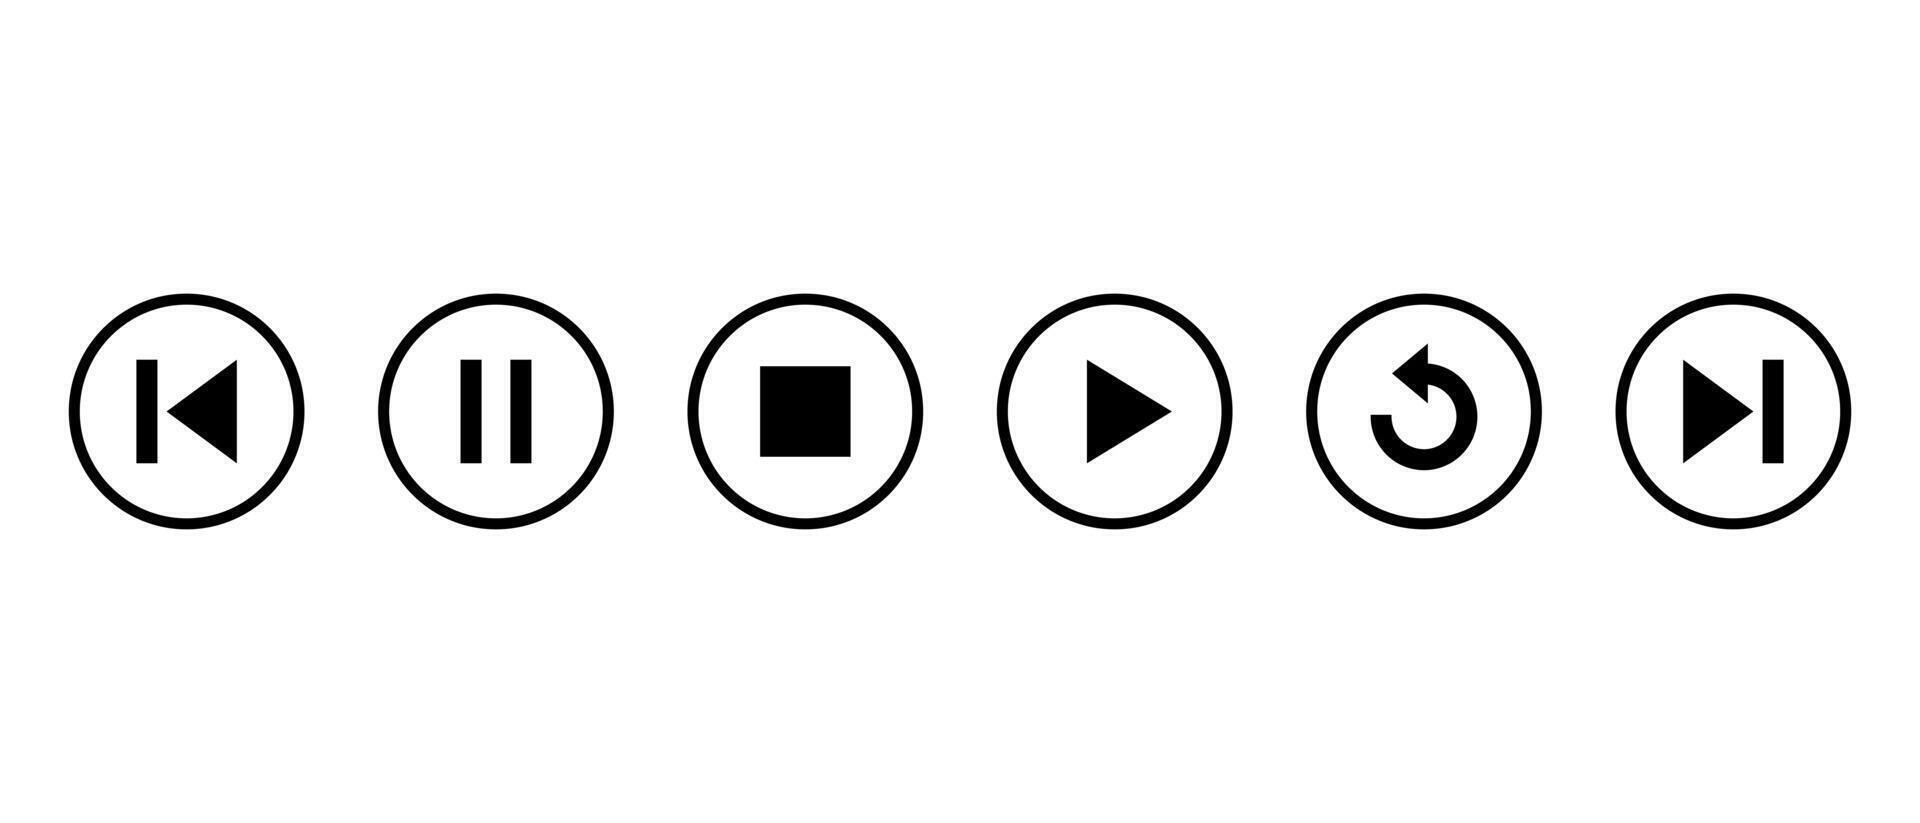 Pause, stop, play, replay, previous, and next track icon on circle line vector